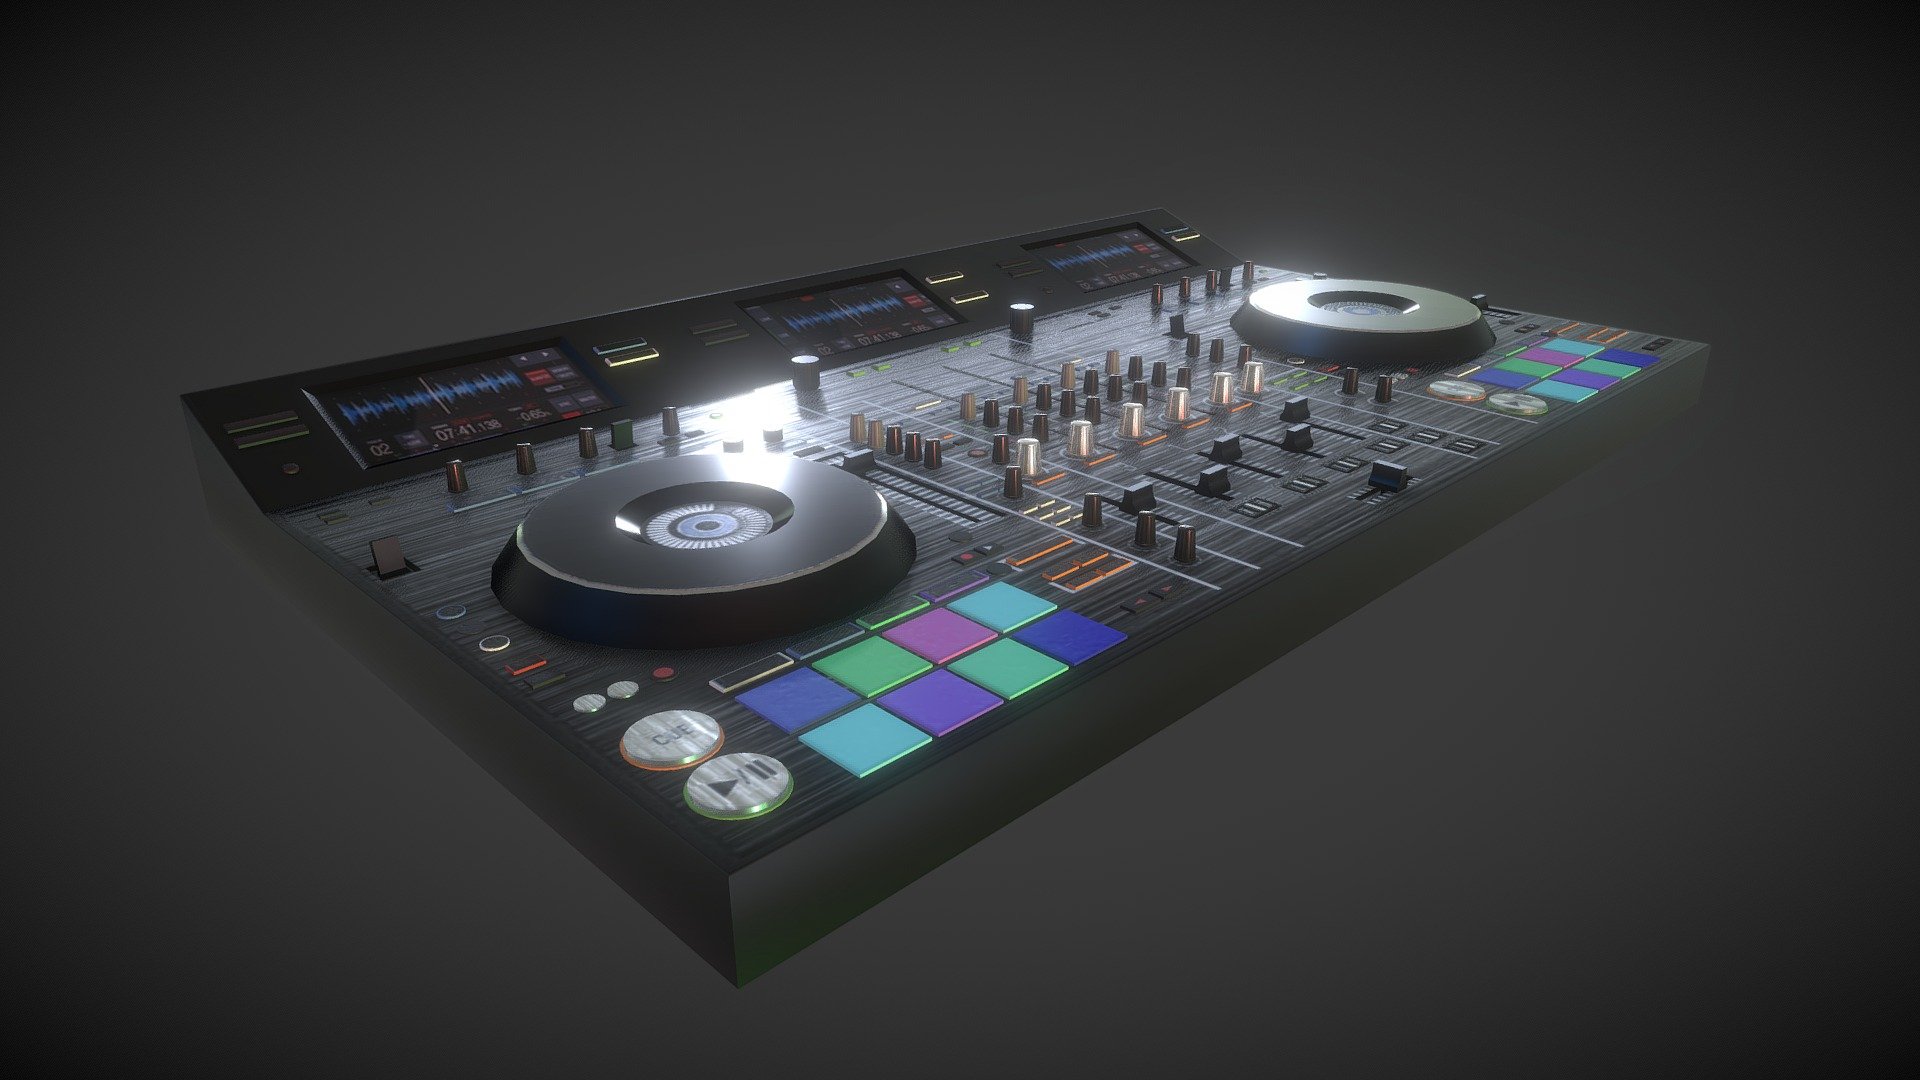 Created in 3DS MAX - Textured in Substance Painter - Pioneer DDJ-RZX 4-Deck Auido/Vidual DJController - 3D model by Charlie Addison (@ca304028) 3d model